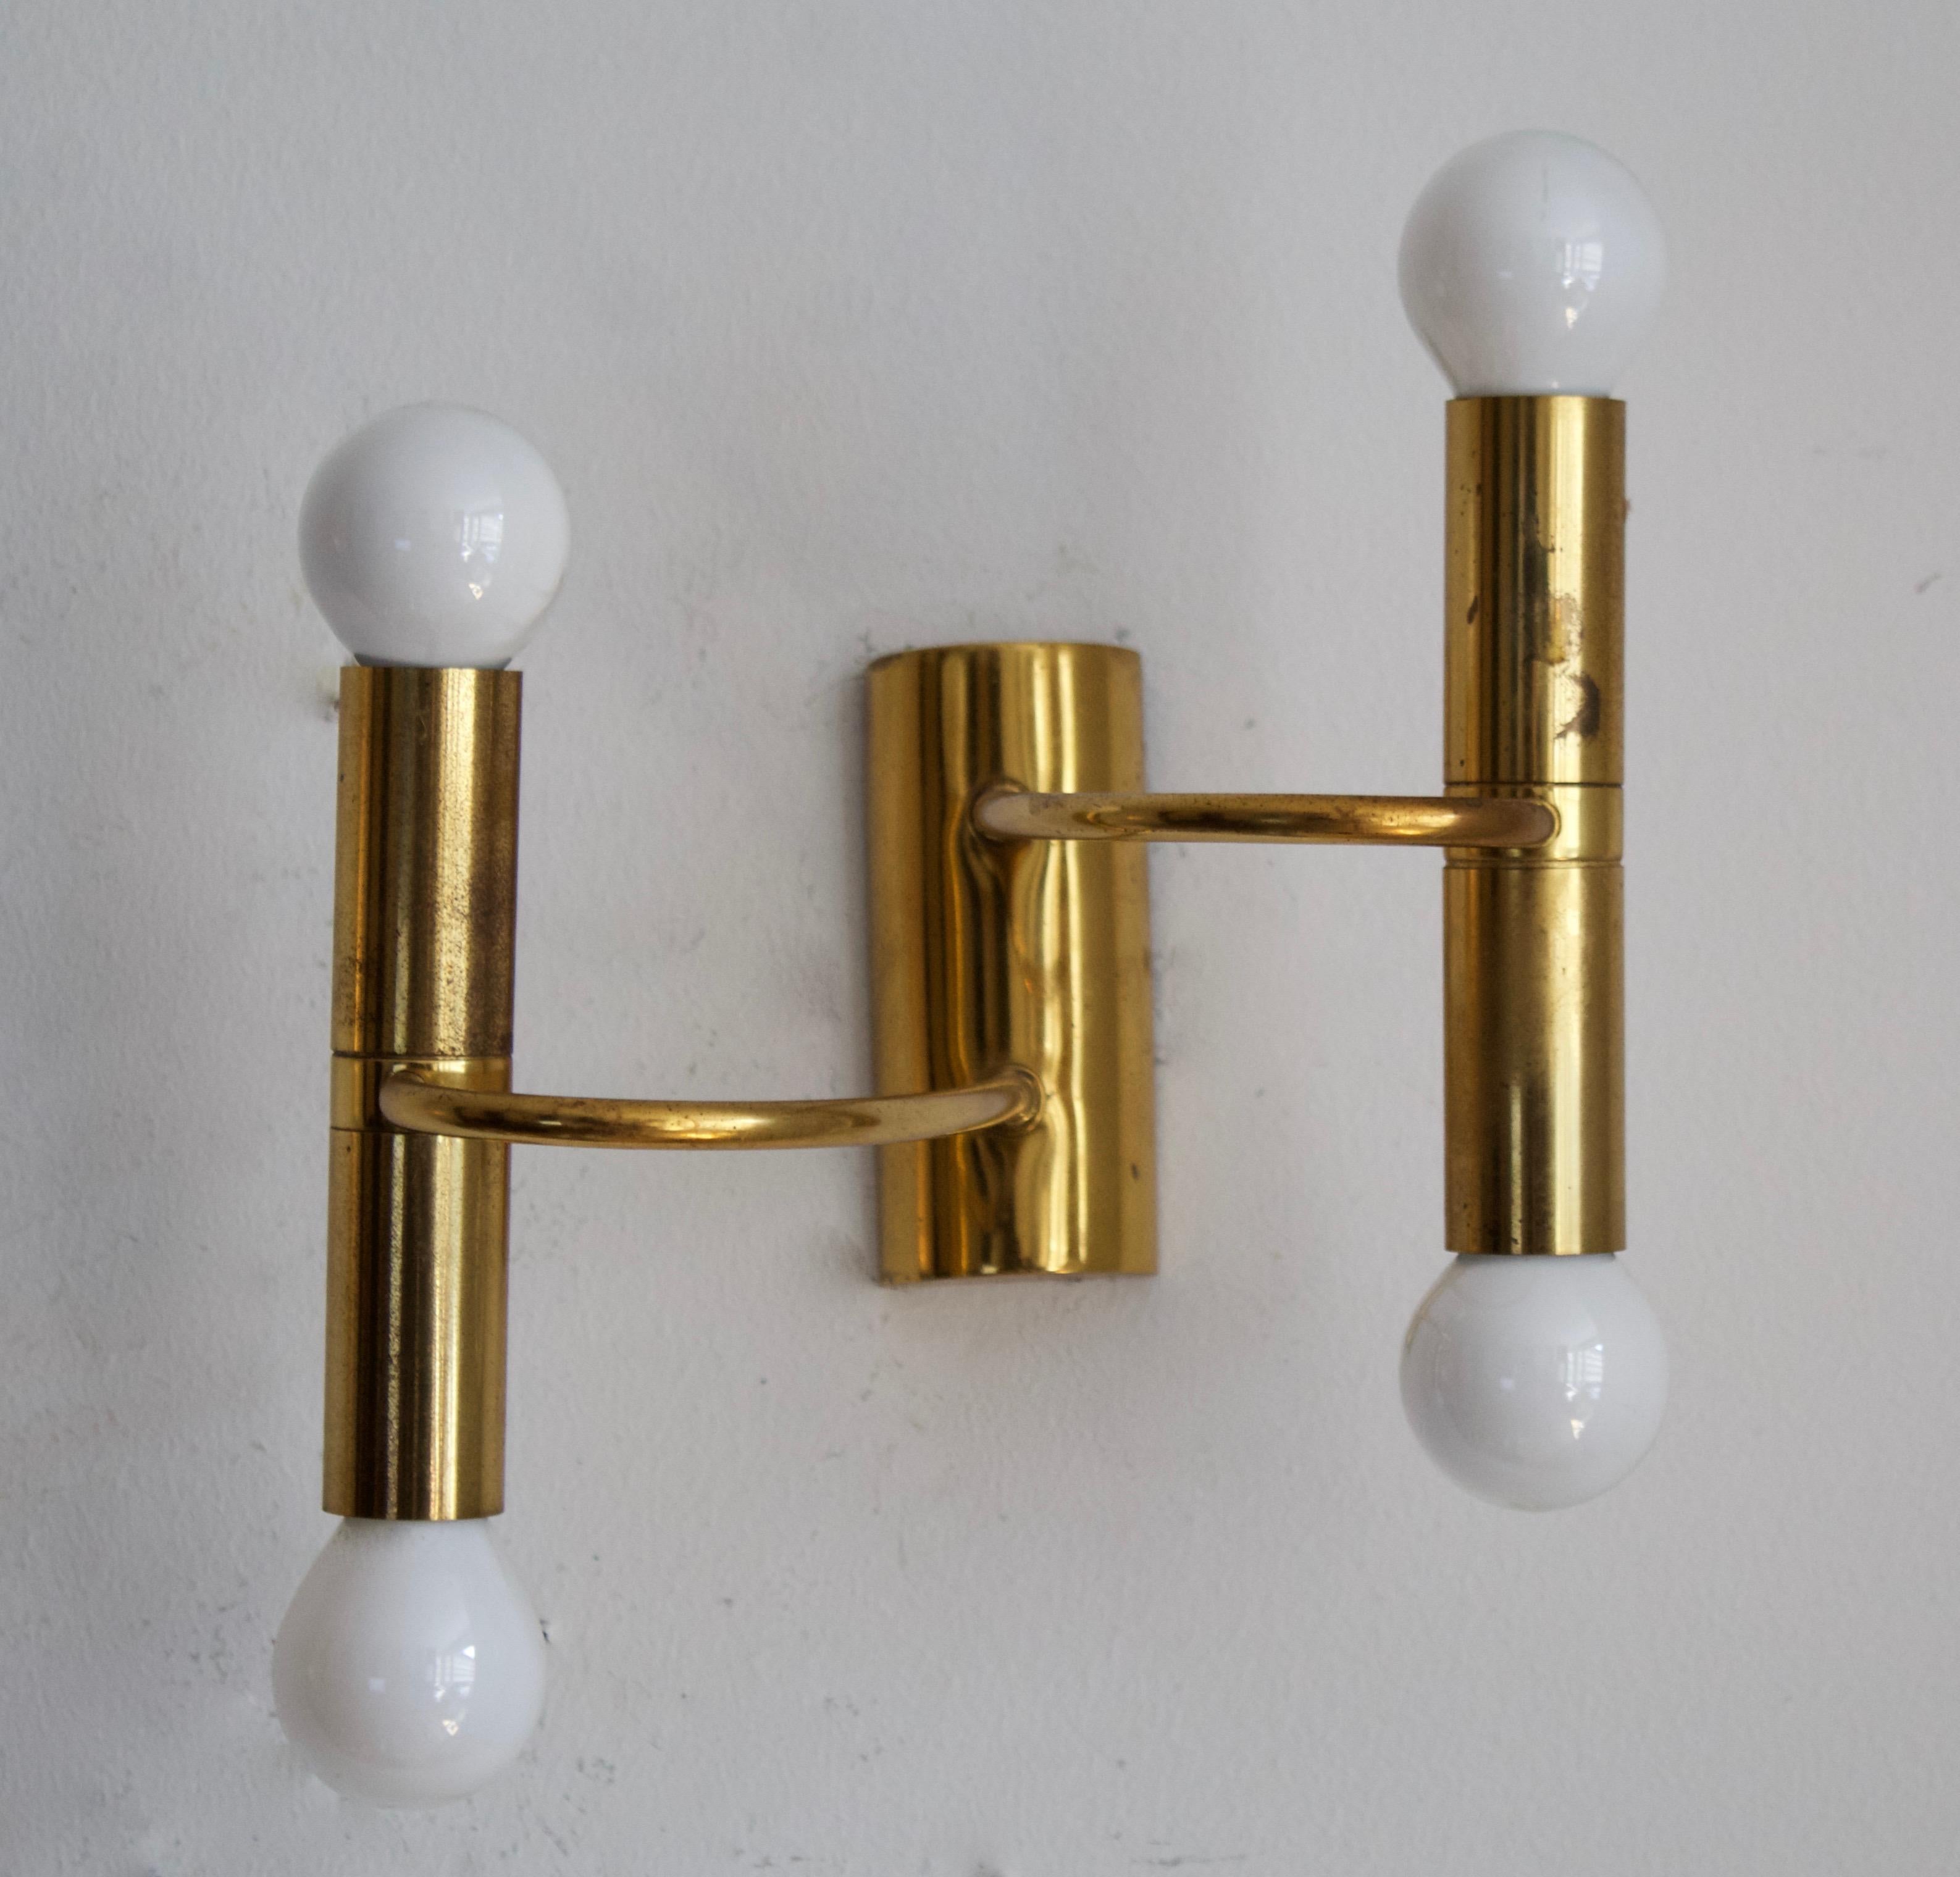 A pair of two-armed wall lights. Designed and produced in Germany, c. 1960s.

 